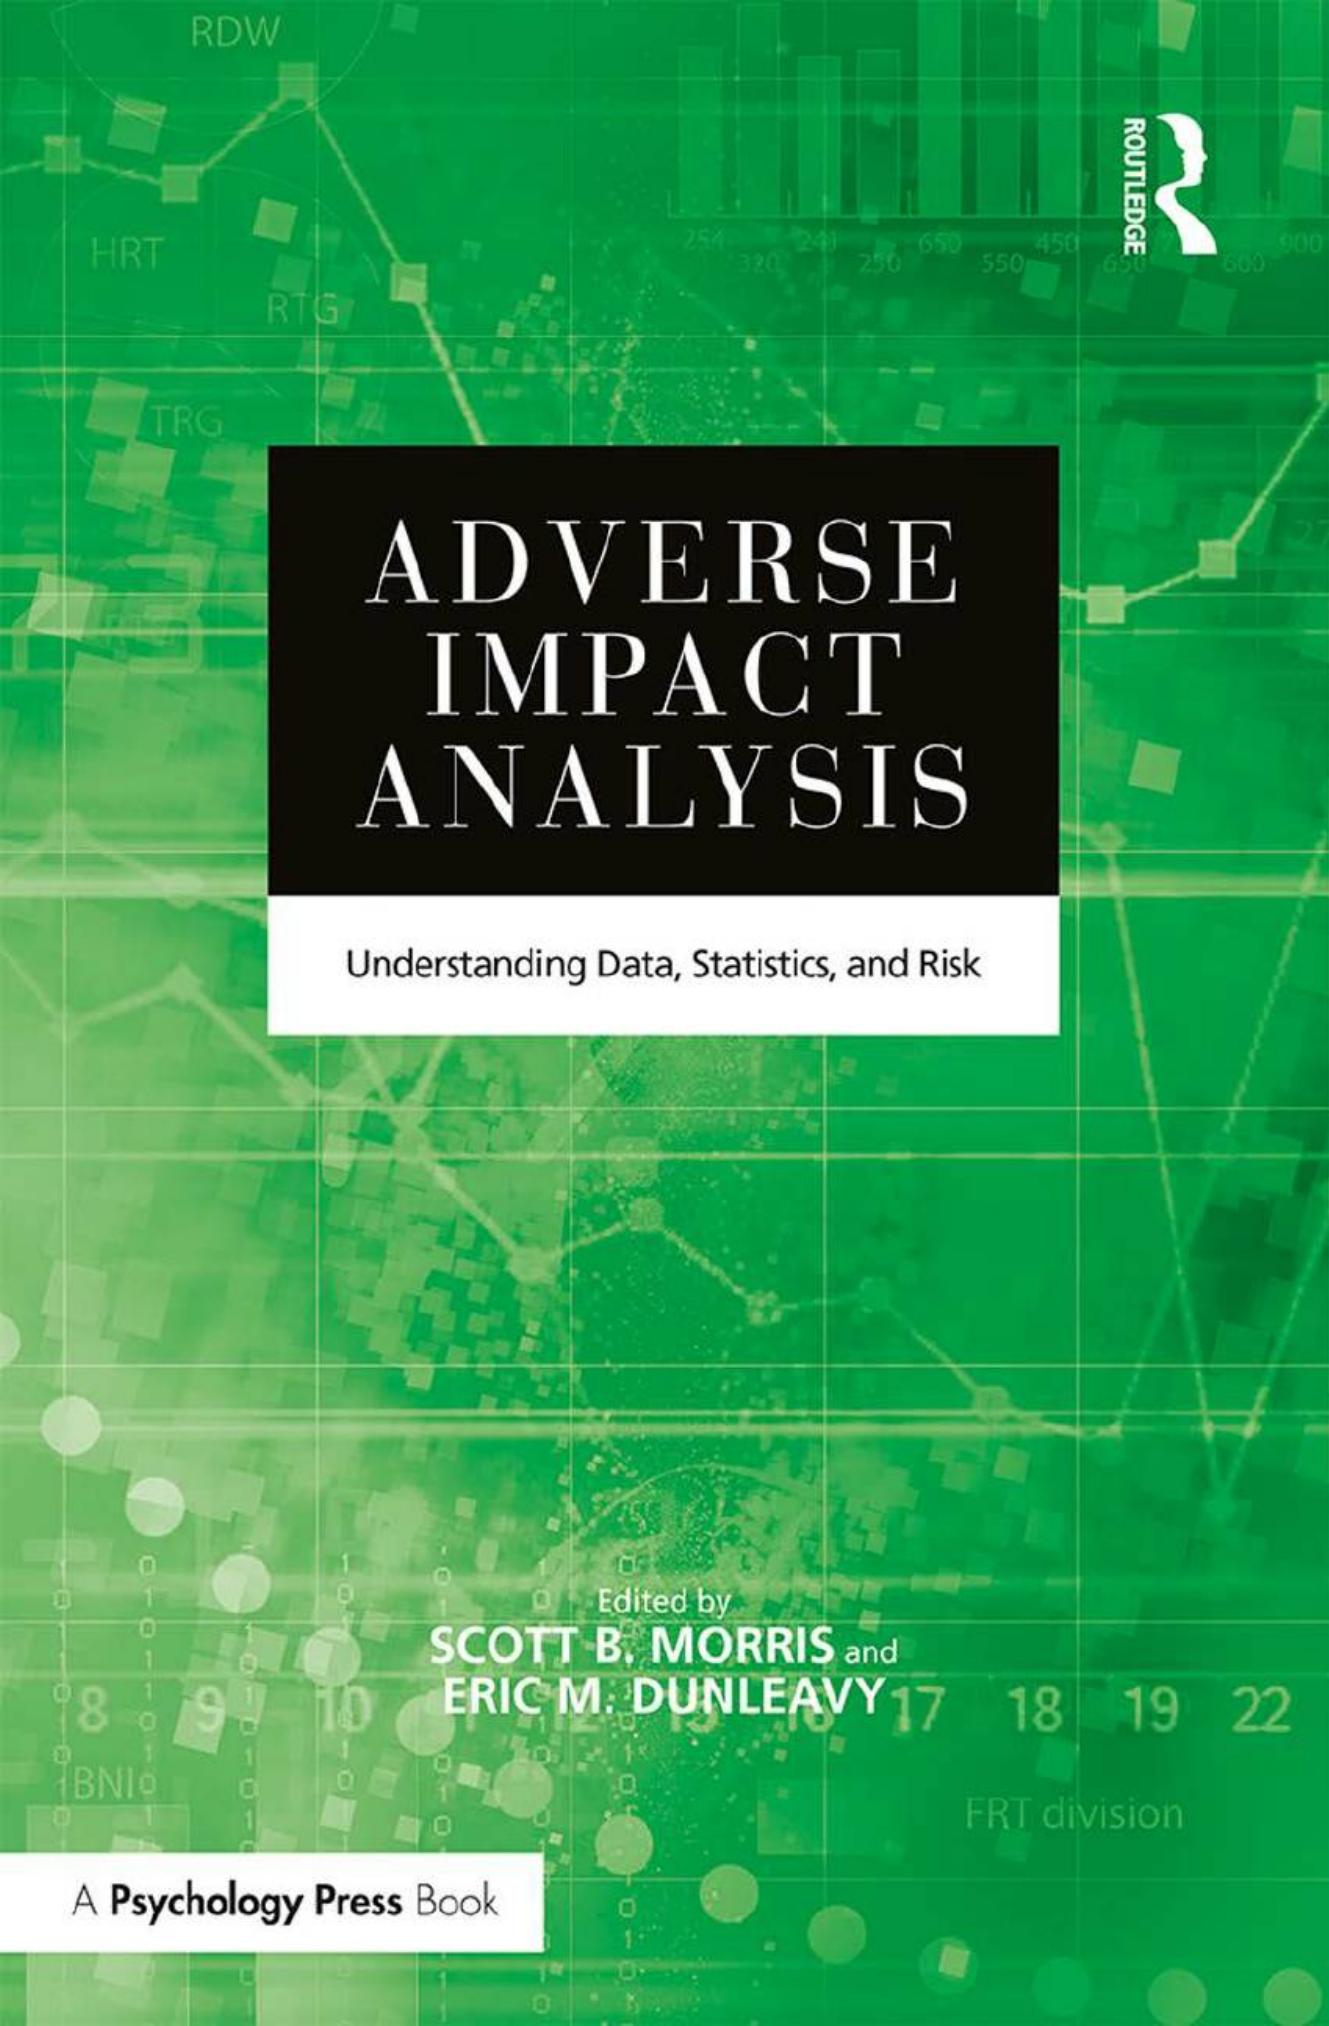 Adverse Impact Analysis: Understanding Data, Statistics, and Risk 1st Edition by Scott B. Morris; Eric M. Dunleavy